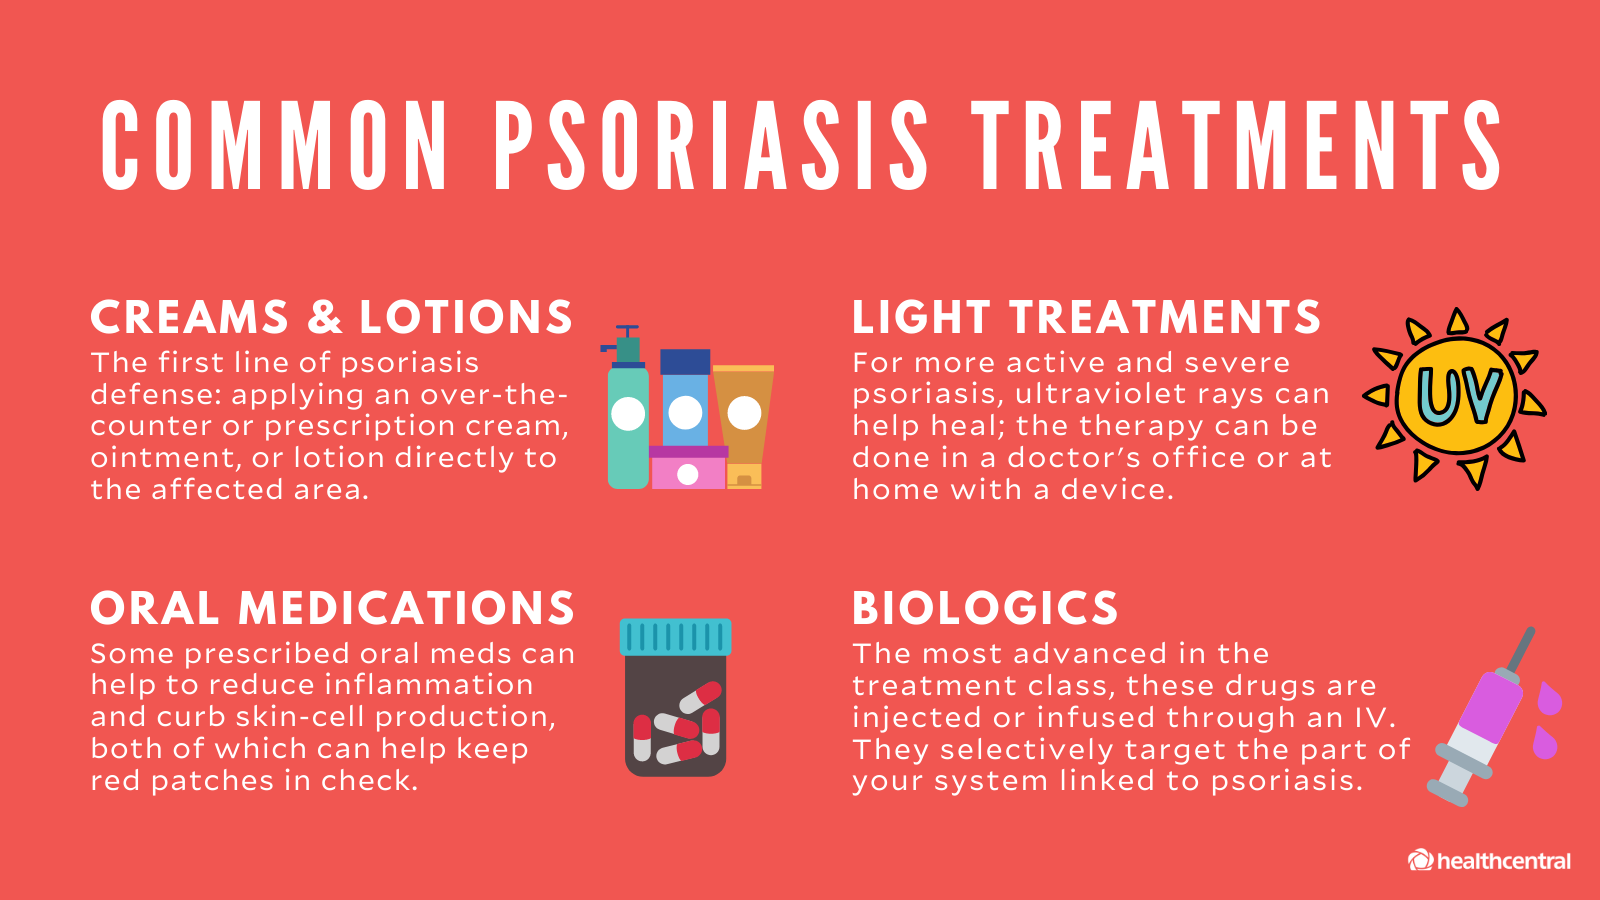 Laser Psoriasis Treatment in Mumbai at Affordable Price by Dr Rinky Kapoor at The Esthetic Clinics